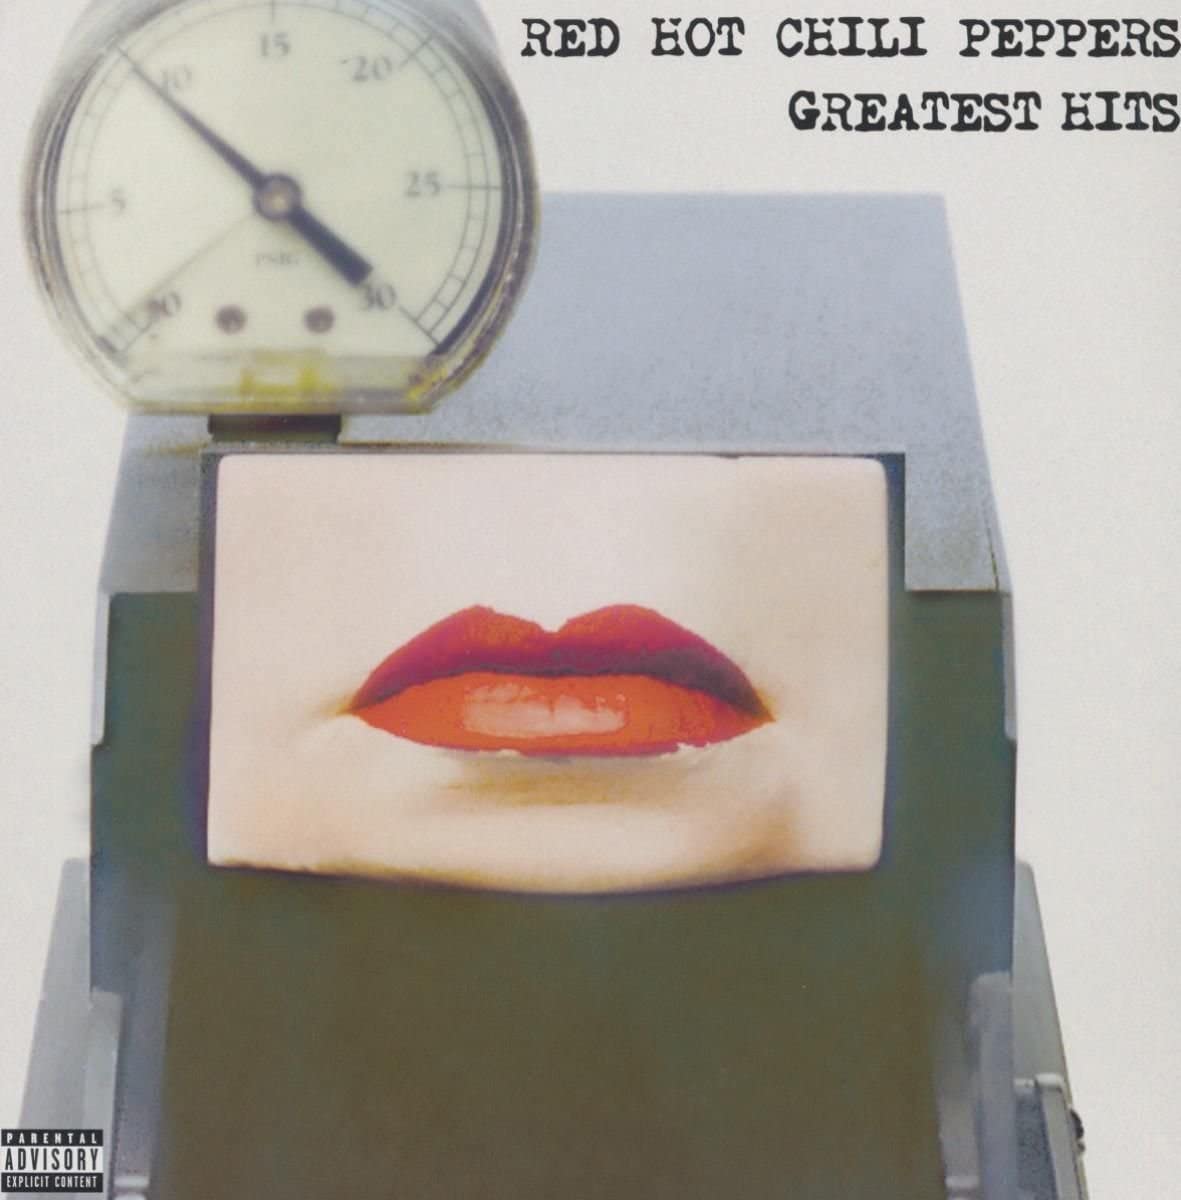 Limited double vinyl LP pressing. The Red Hot Chili Peppers' first Warner Bros. Greatest Hits album spans almost 15 years of rock greatness. Featuring all of the band's best- loved recordings